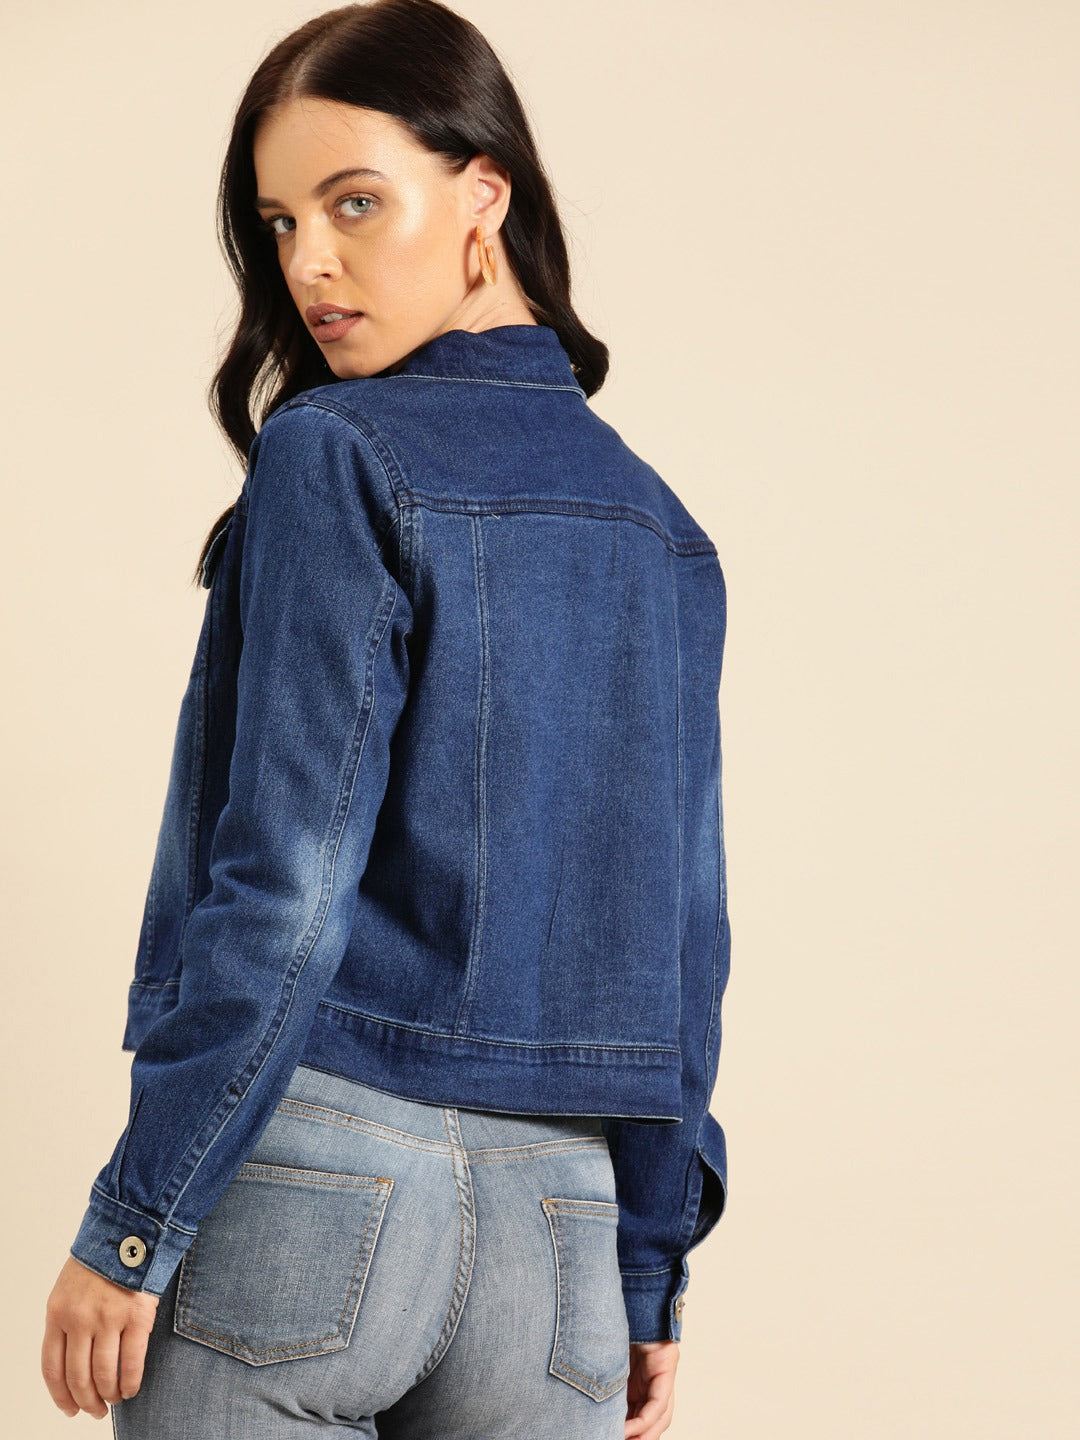 Dark blue washed women's denim jacket with standard collar and front button closure, worn by a young woman with long dark hair.